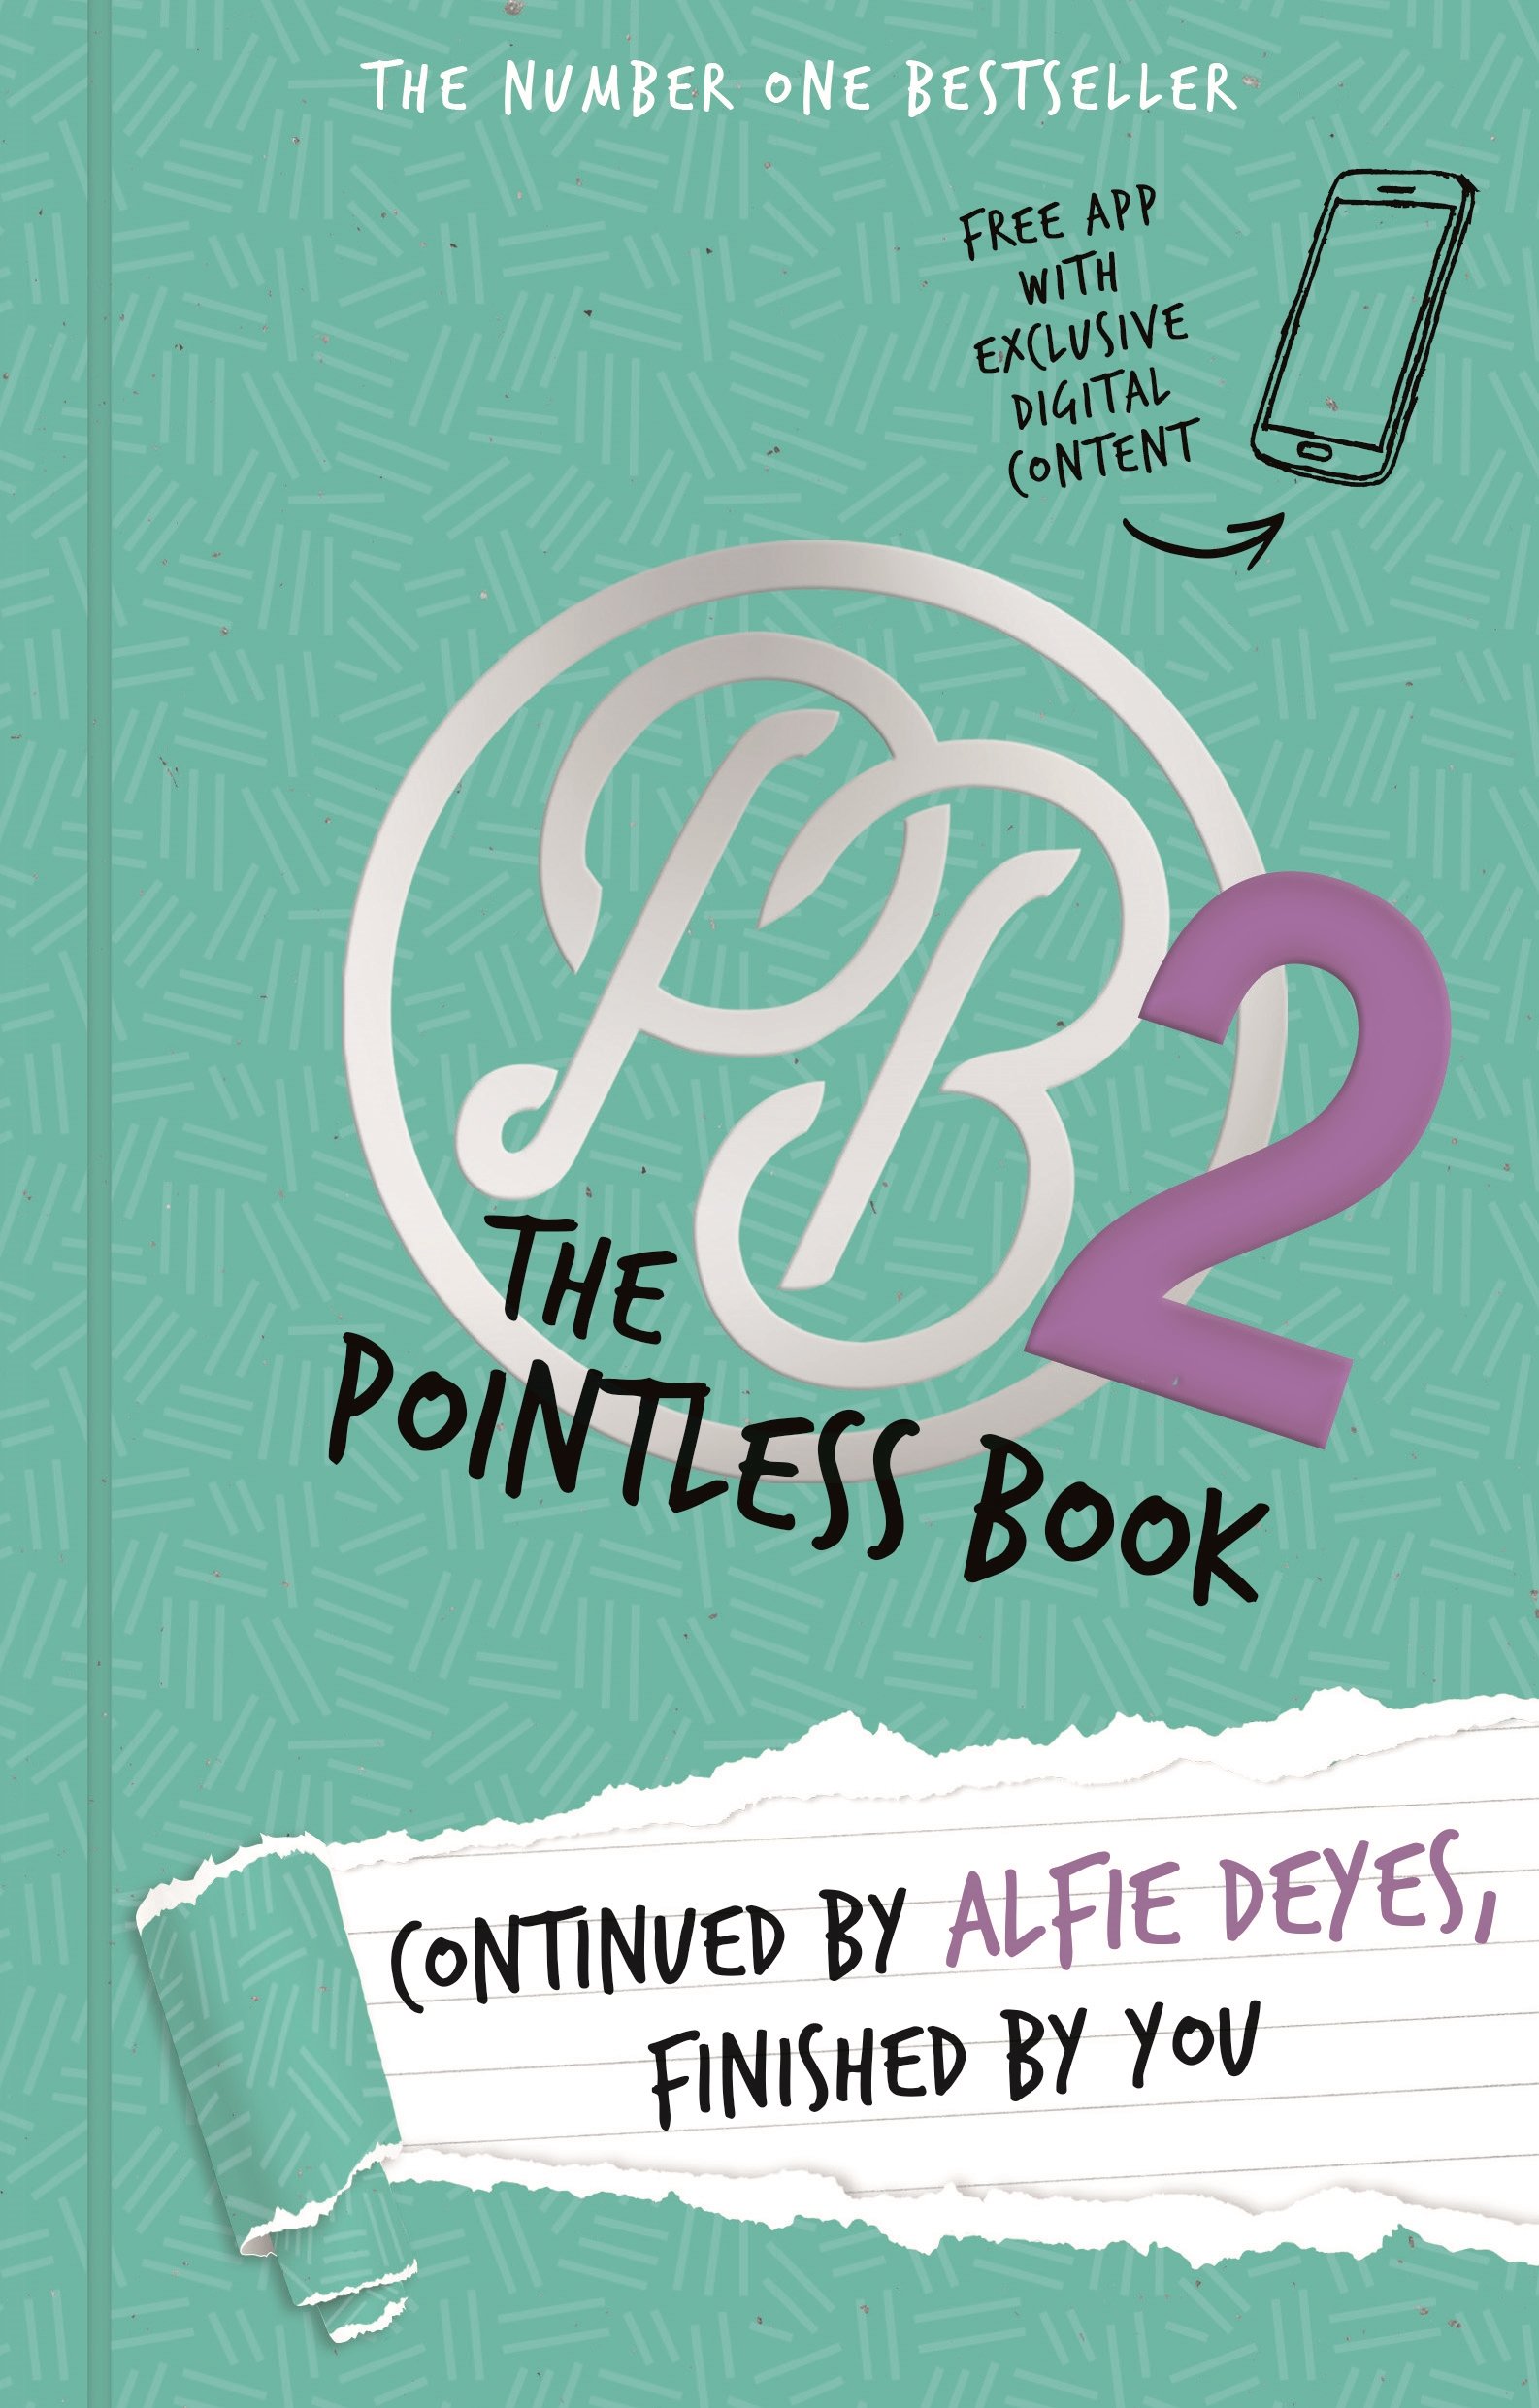 THE POINTLESS BOOK 2